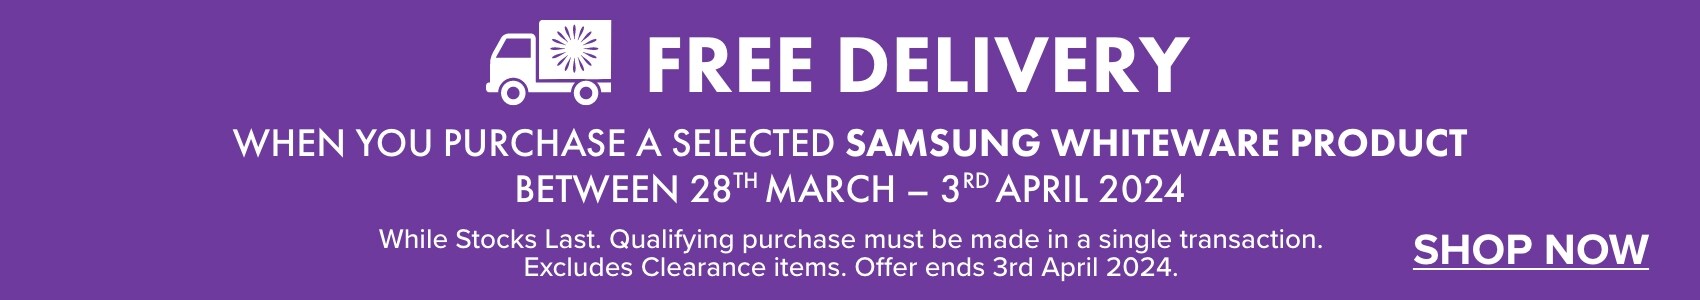 FREE DELIVERY when you purchase a selected Samsung Whiteware Product between 28th March – 3rd April 2024